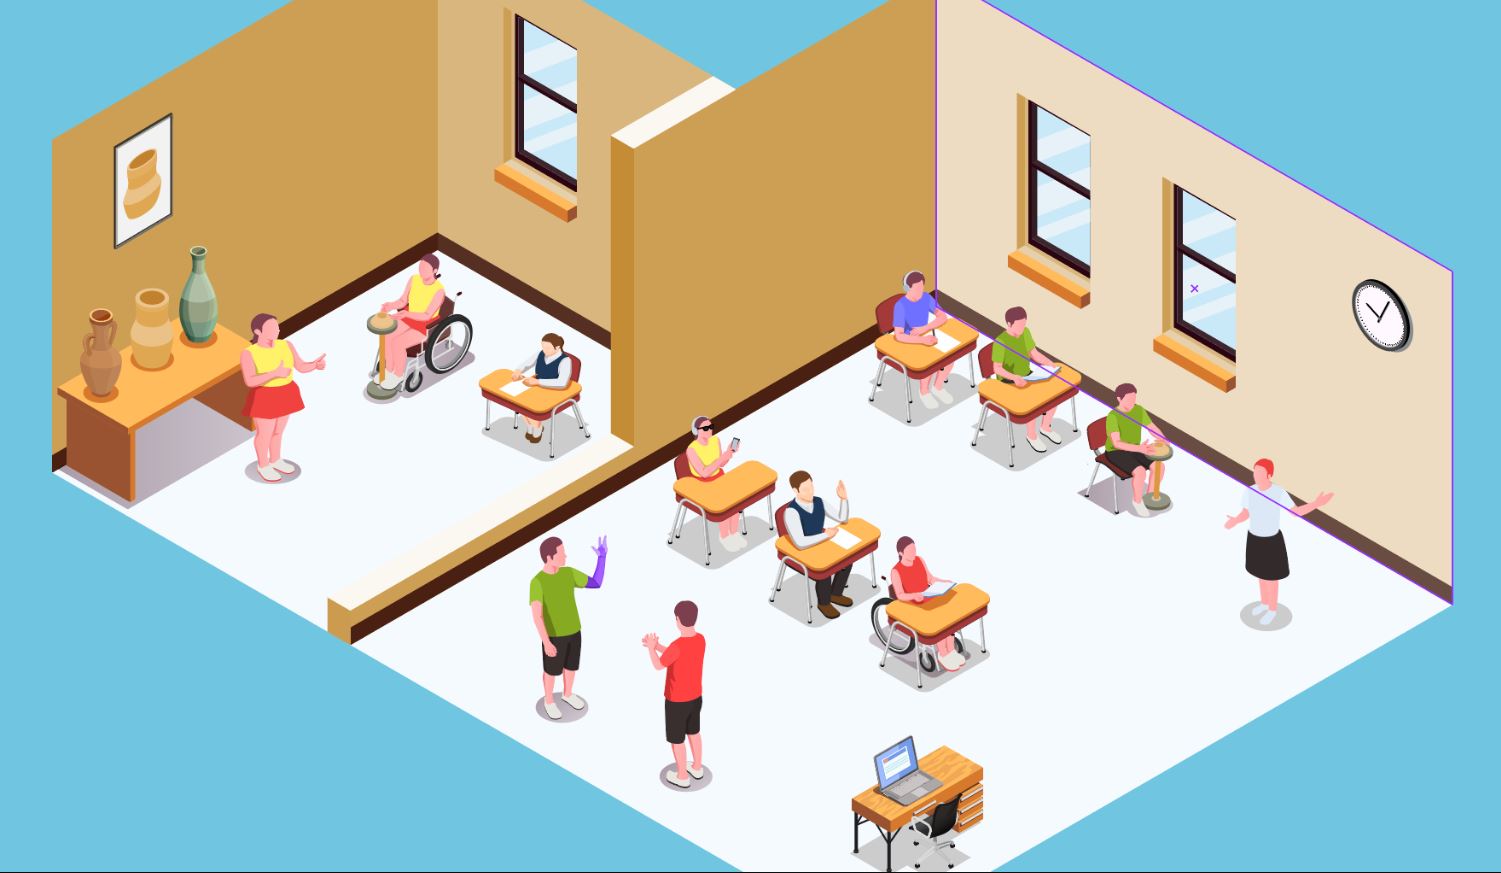 Graphic art of two classrooms with students and teachers